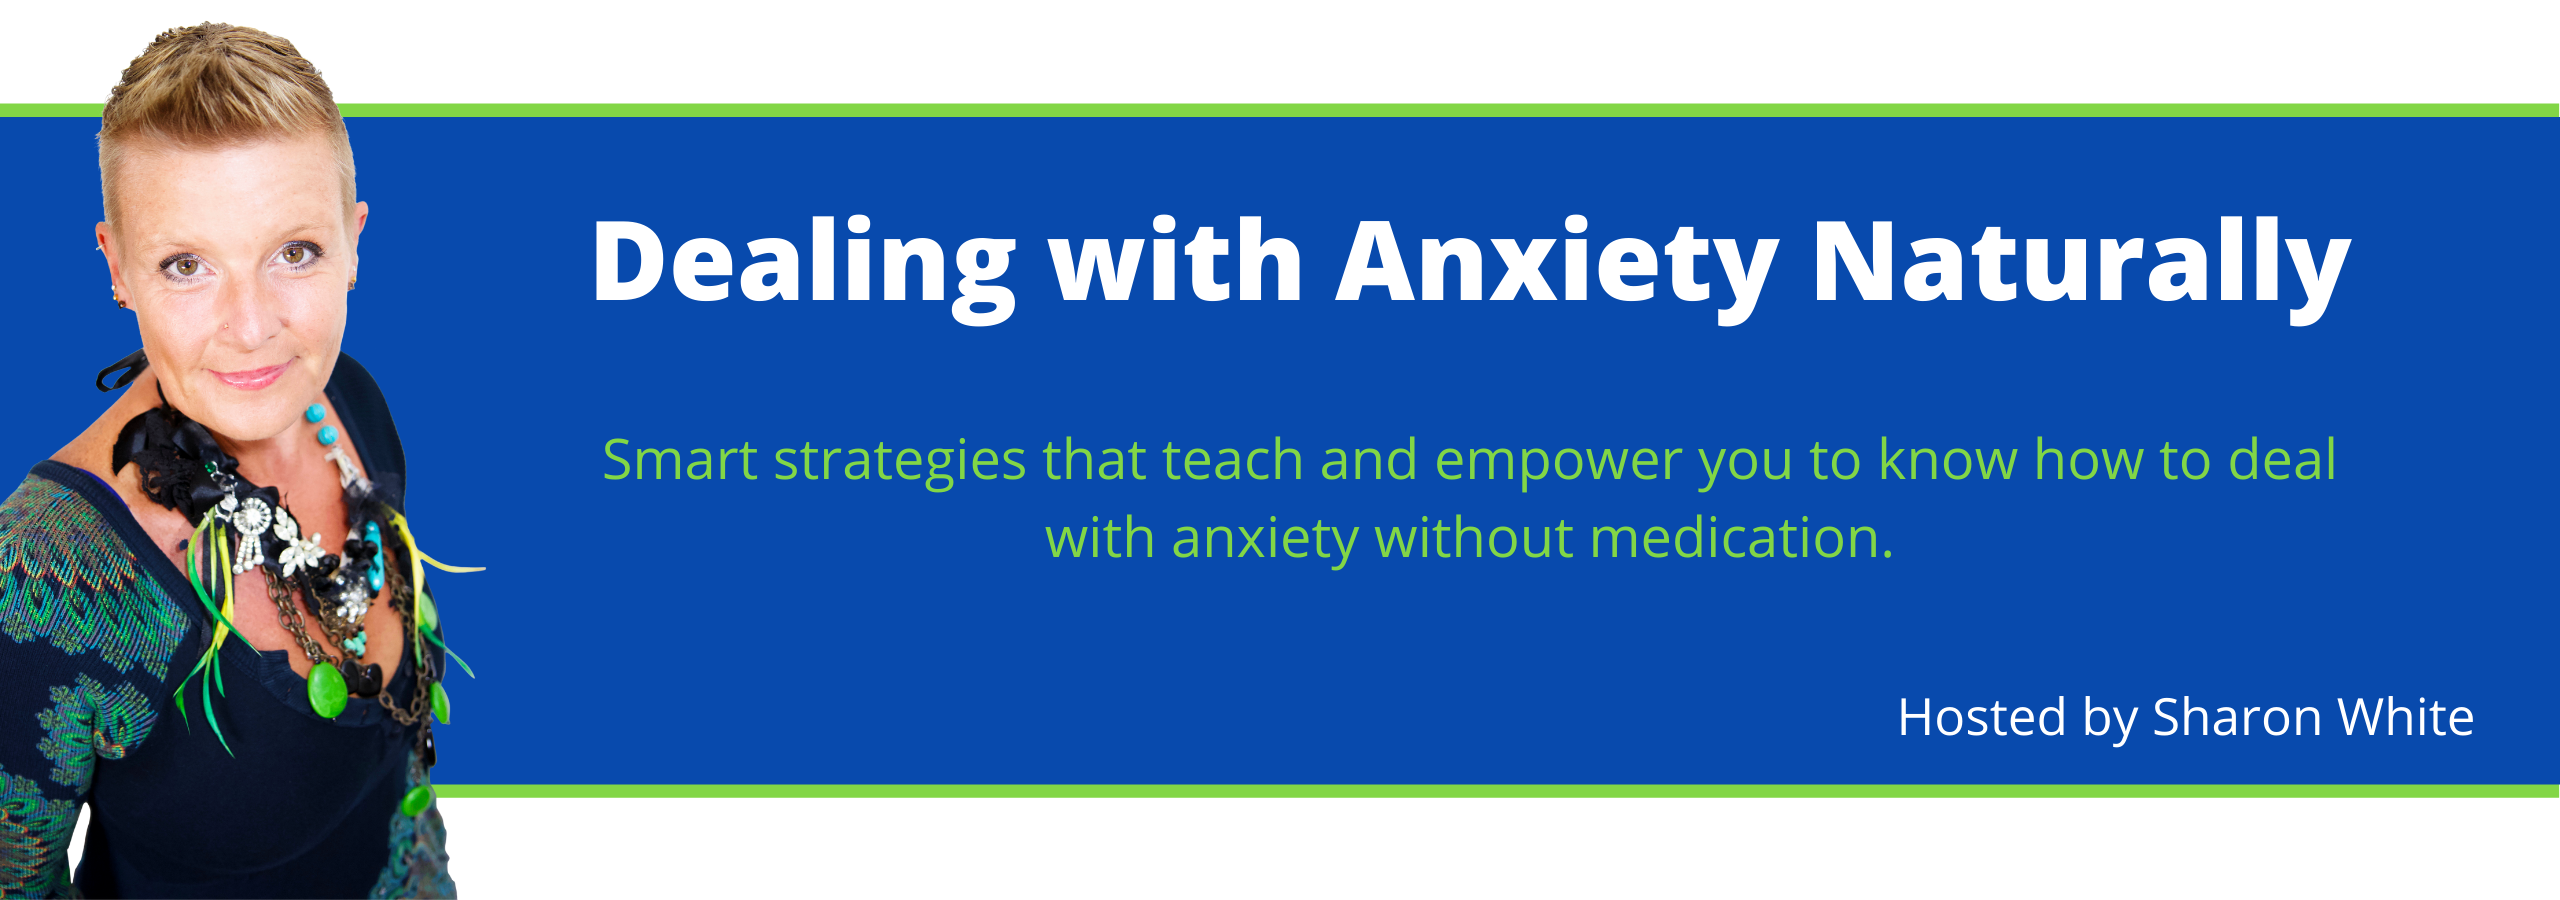 Dealing With Anxiety Naturally